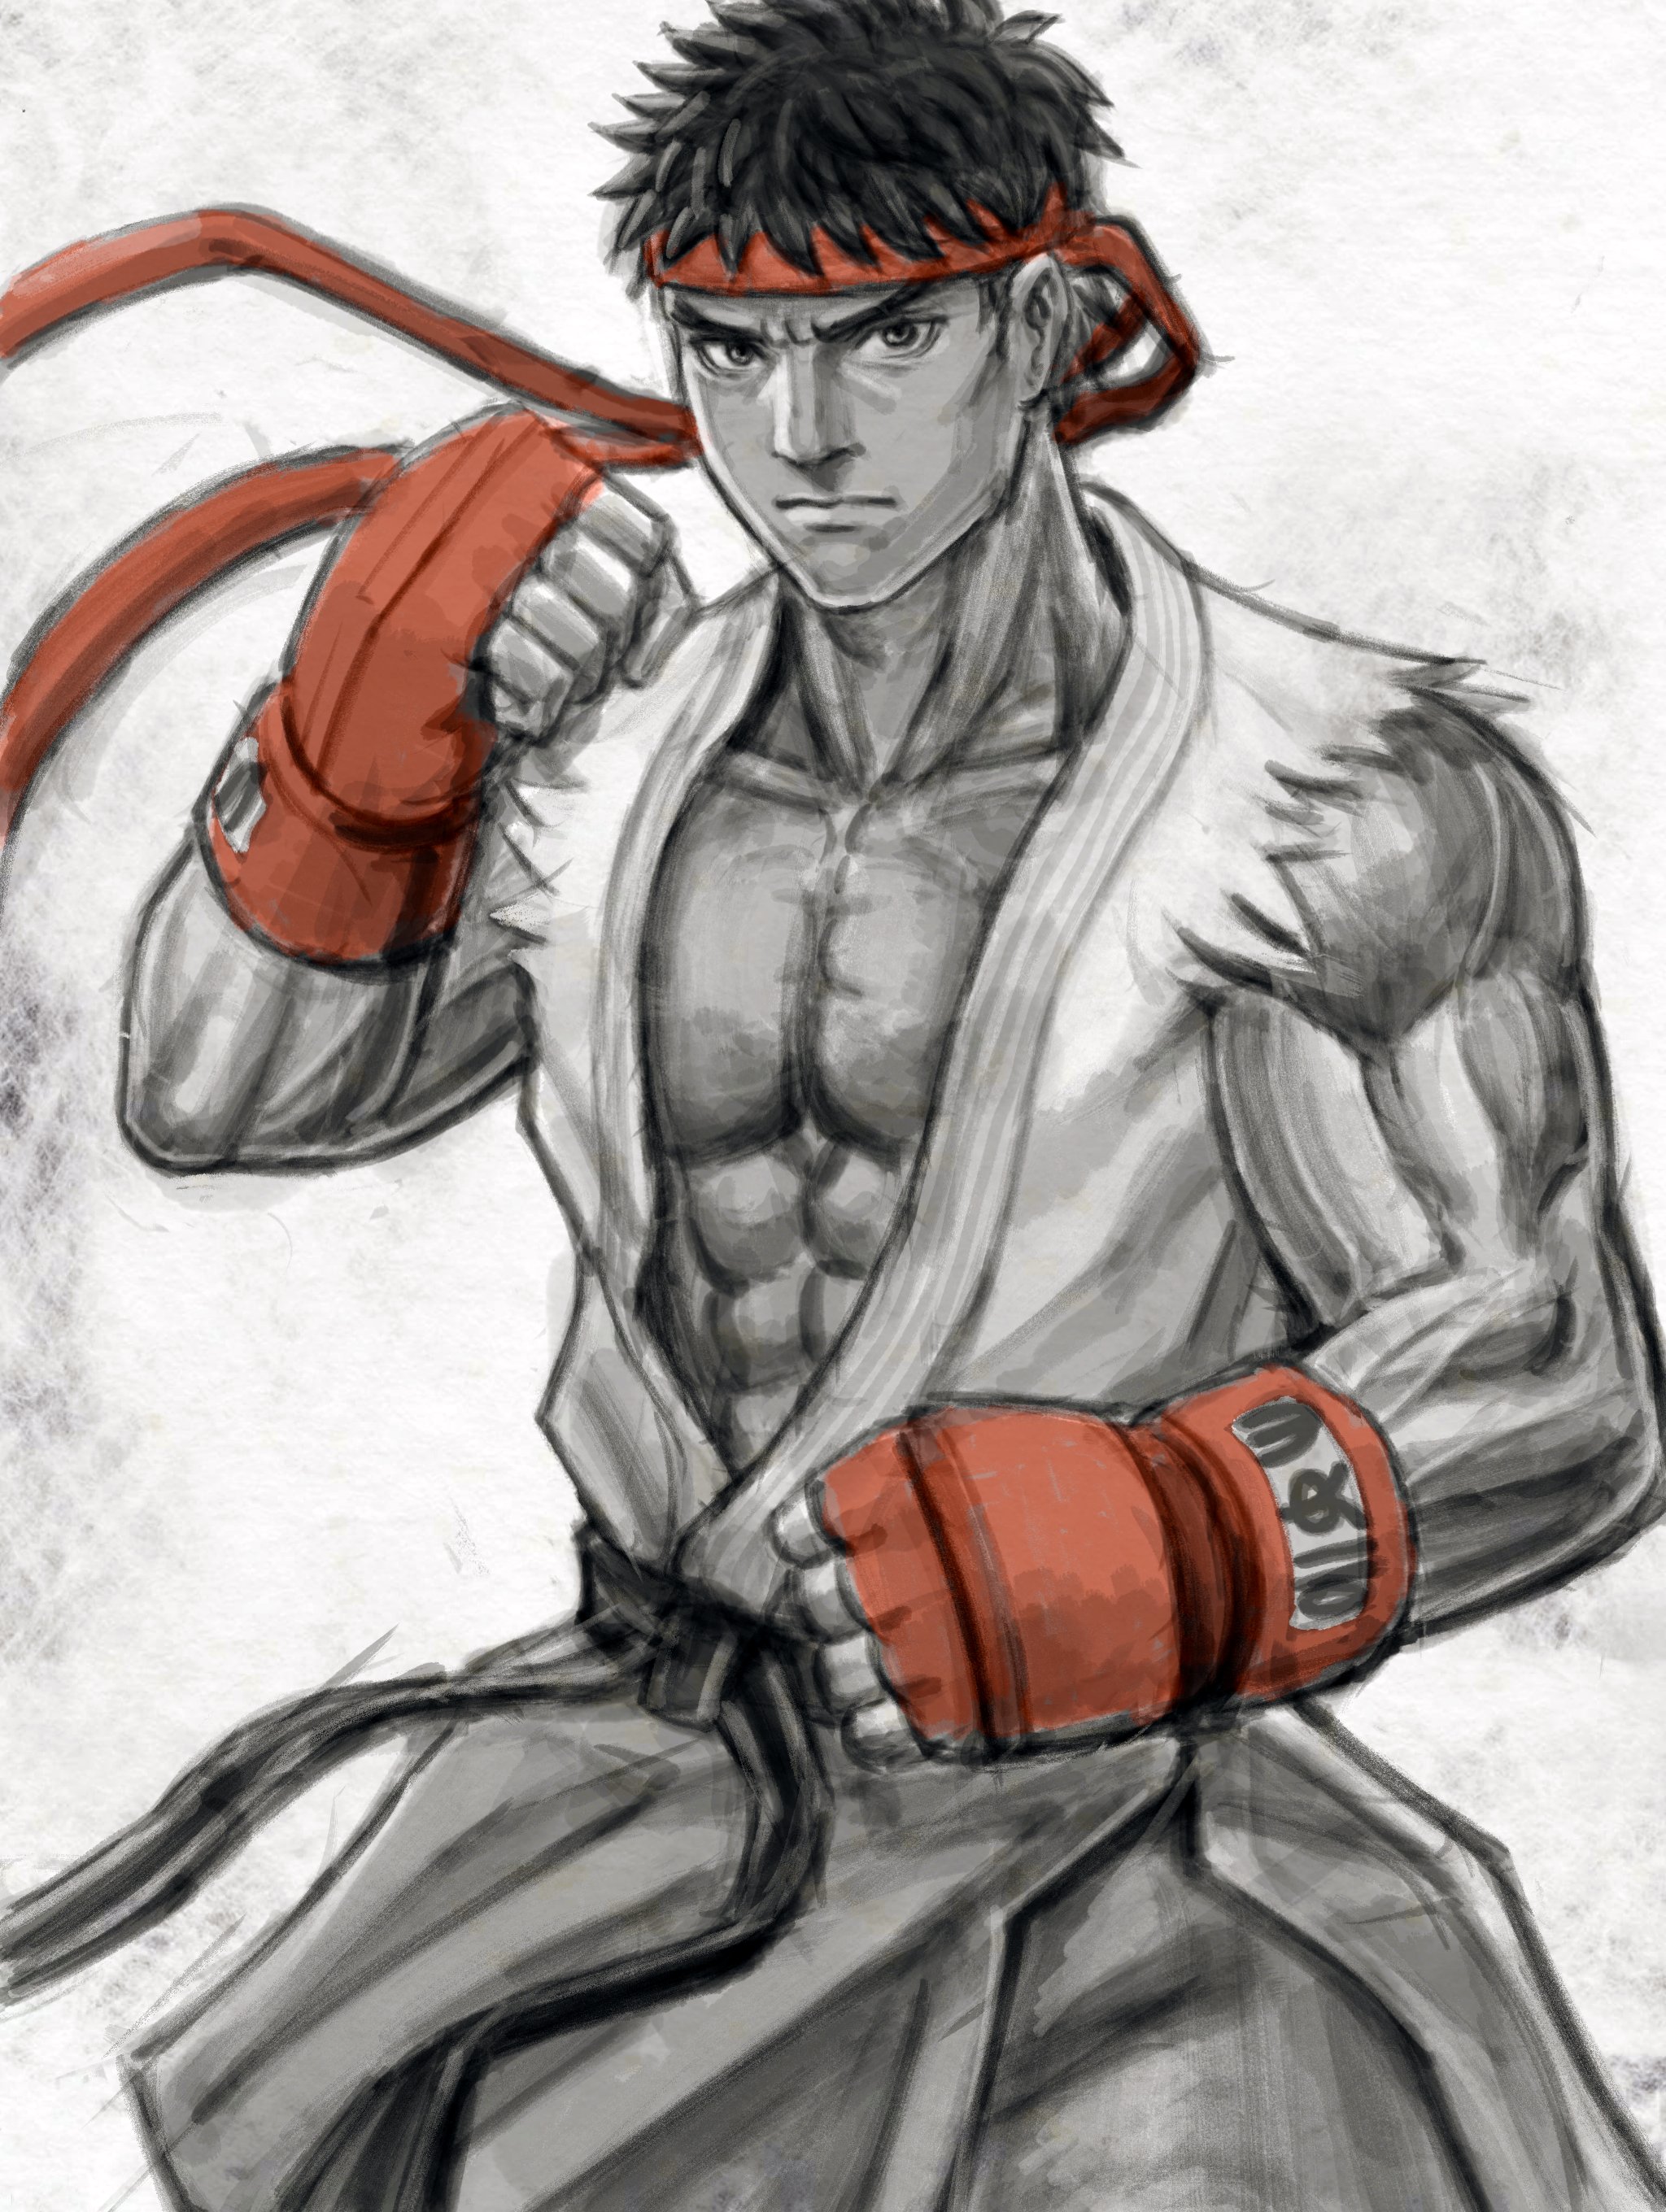 video game characters, Ryu (Street Fighter), short hair, brunette